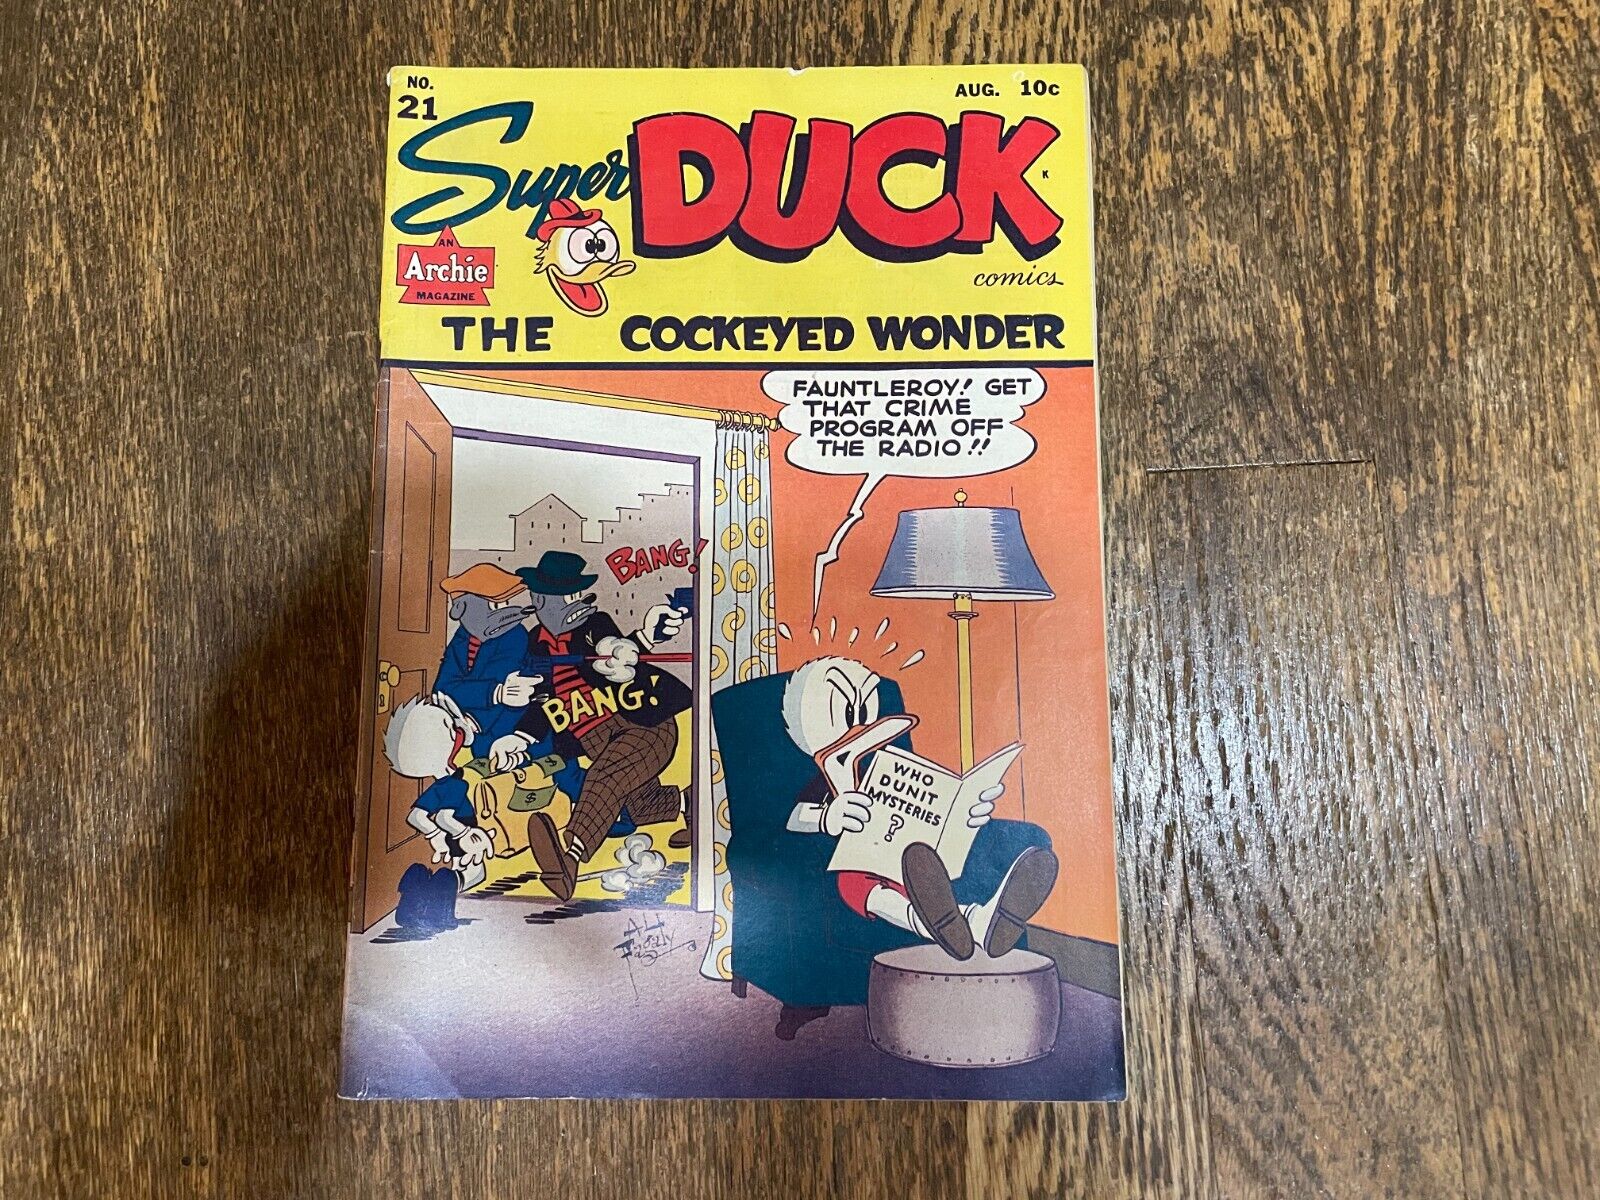 Super Duck # 21 1948 Archie Comic Book The Cockeyed Wonder Golden Age August